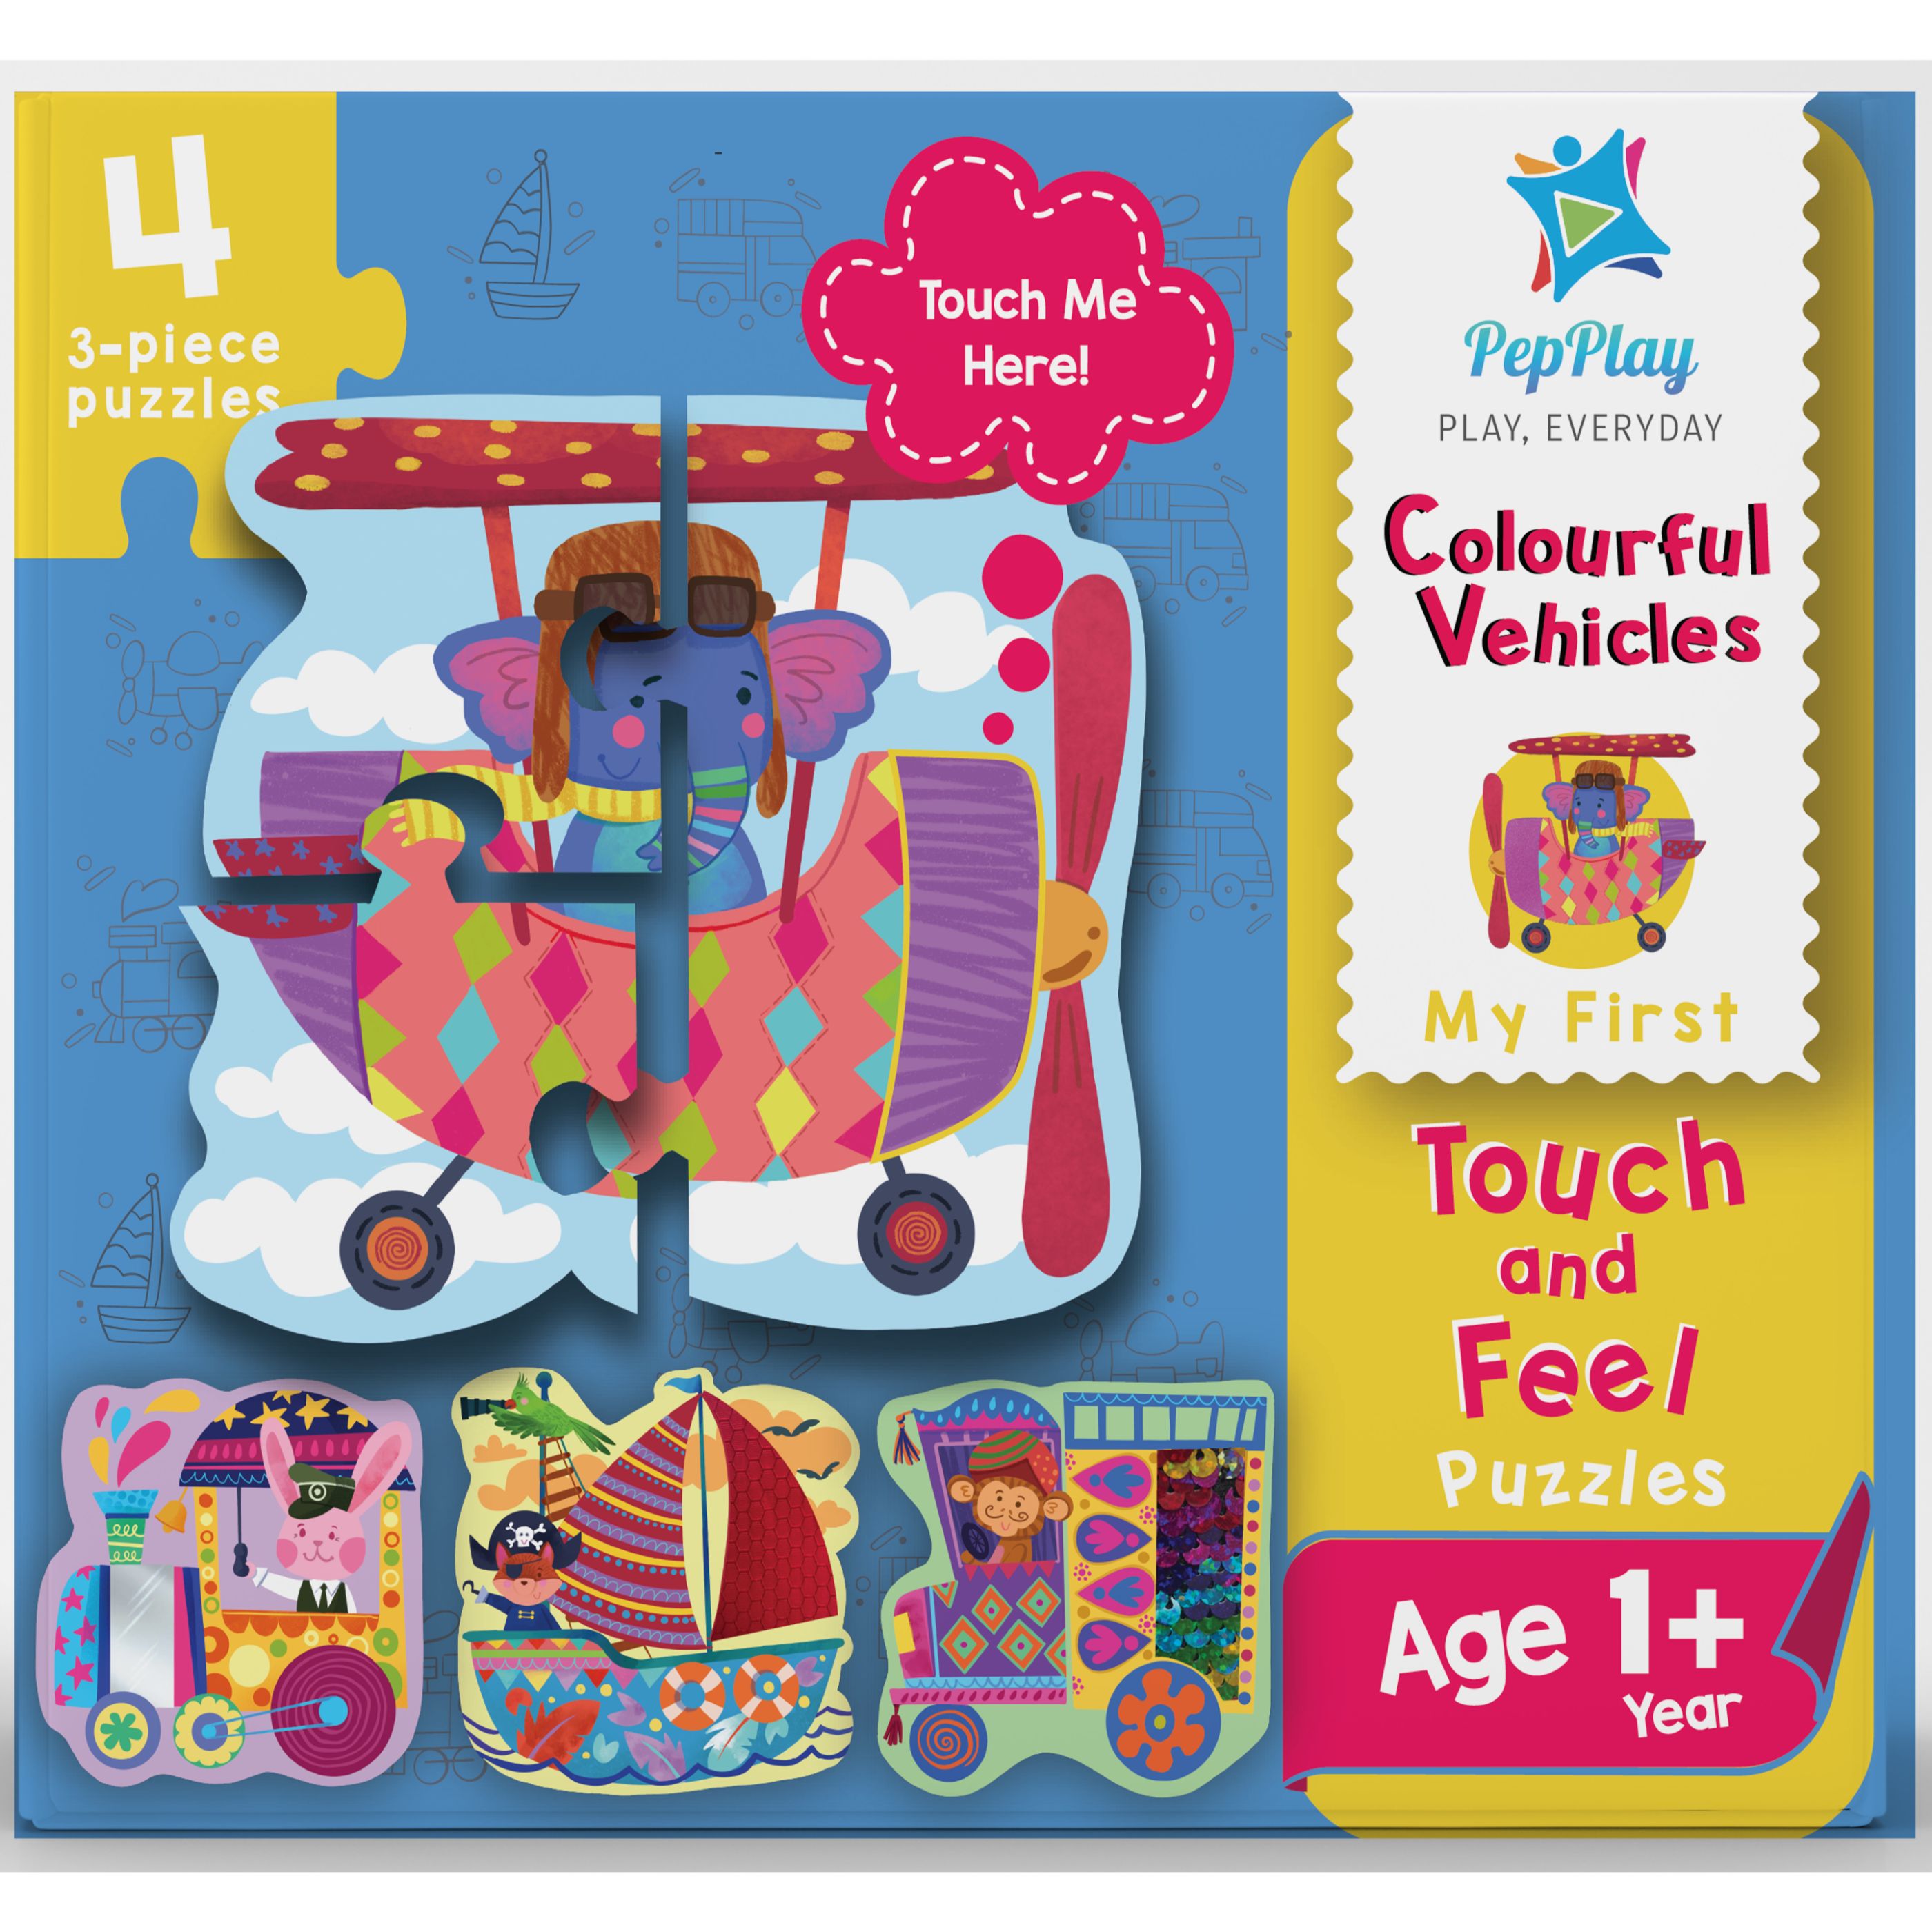 My First Touch & Feel Puzzles – Colourful Vehicles